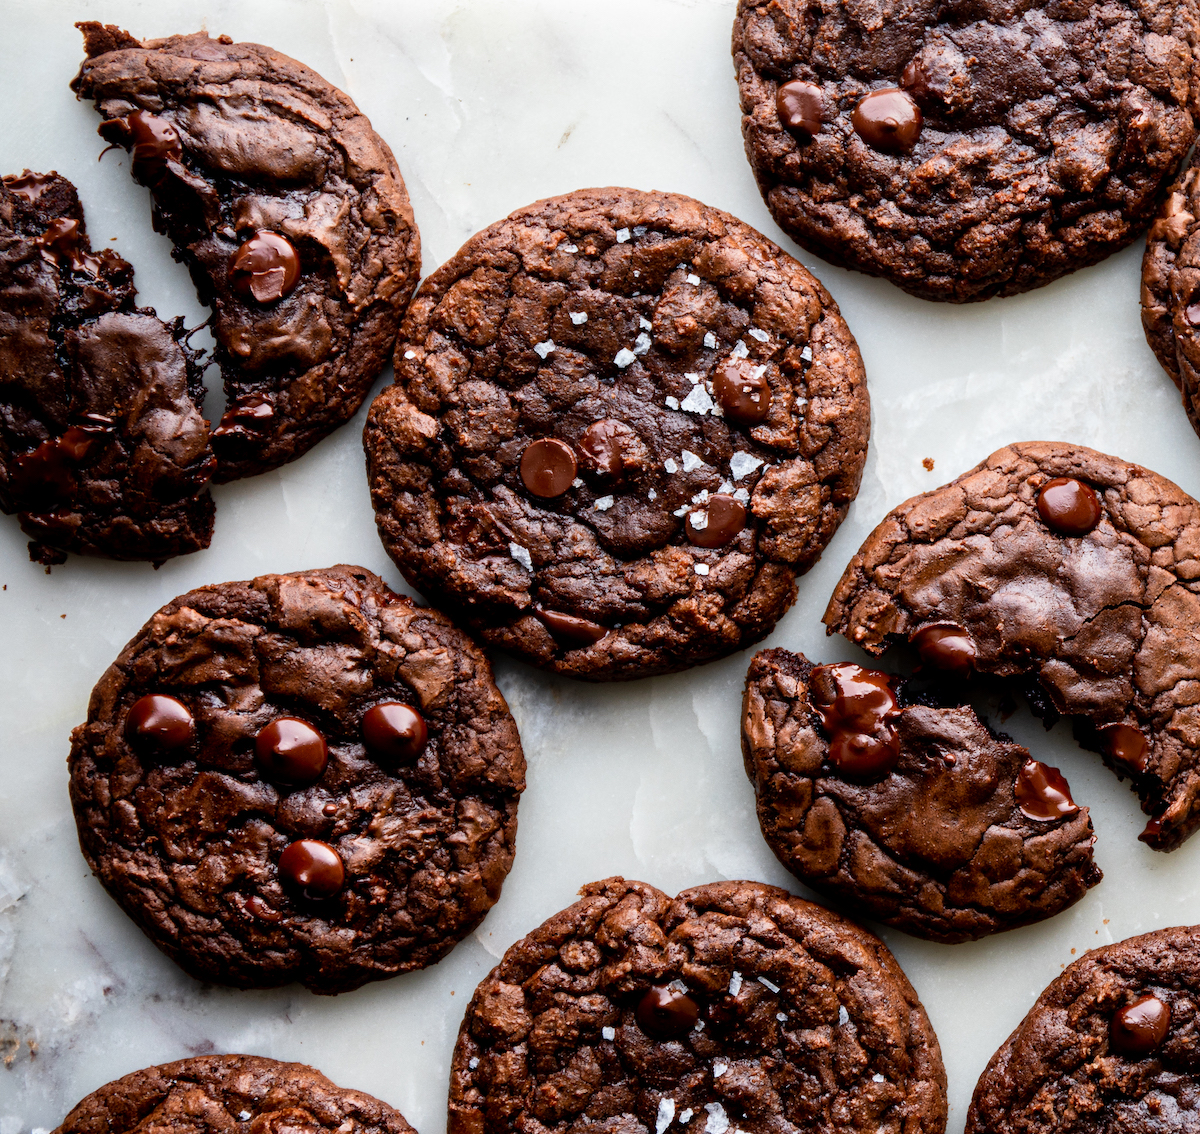 A bunch of chocolate cookies on a white surface with sea salt flakes.